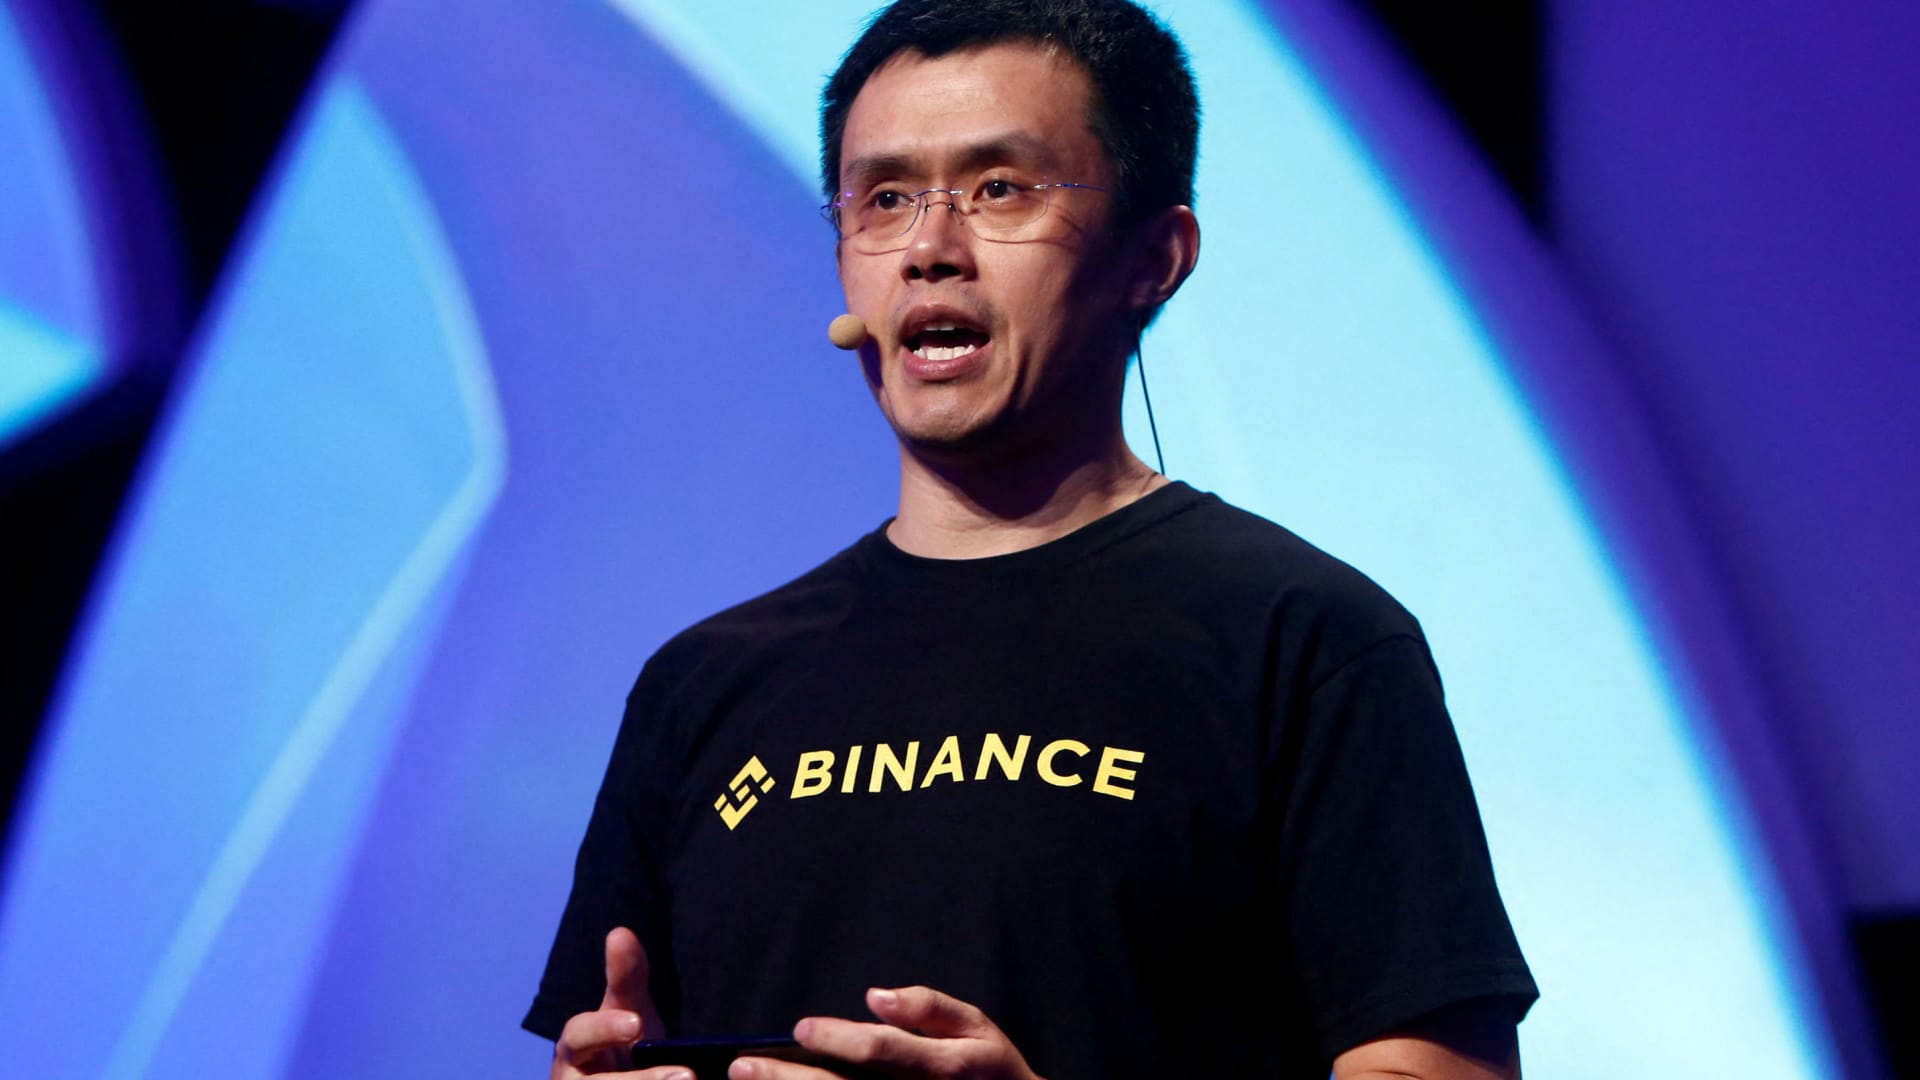 Binance CEO Zhao brushes off $2.1 billion FTX clawback concerns